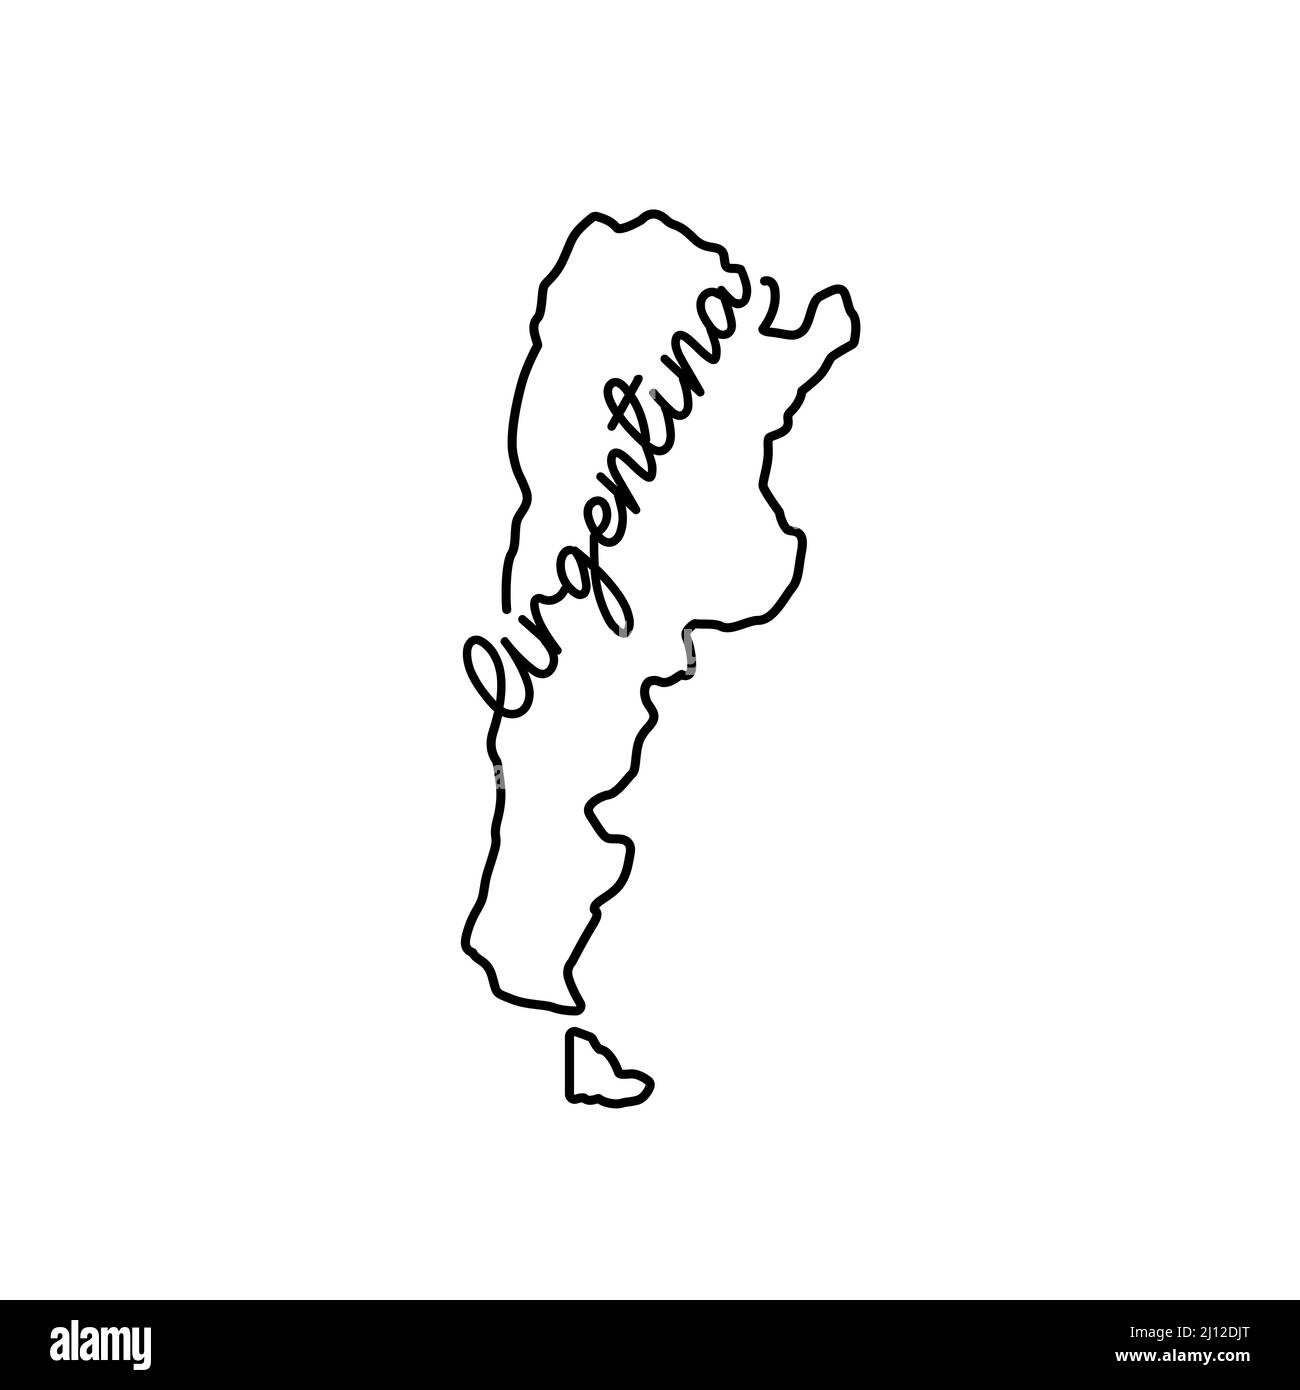 Argentina outline map with the handwritten country name. Continuous line drawing of patriotic home sign. A love for a small homeland. T-shirt print id Stock Vector